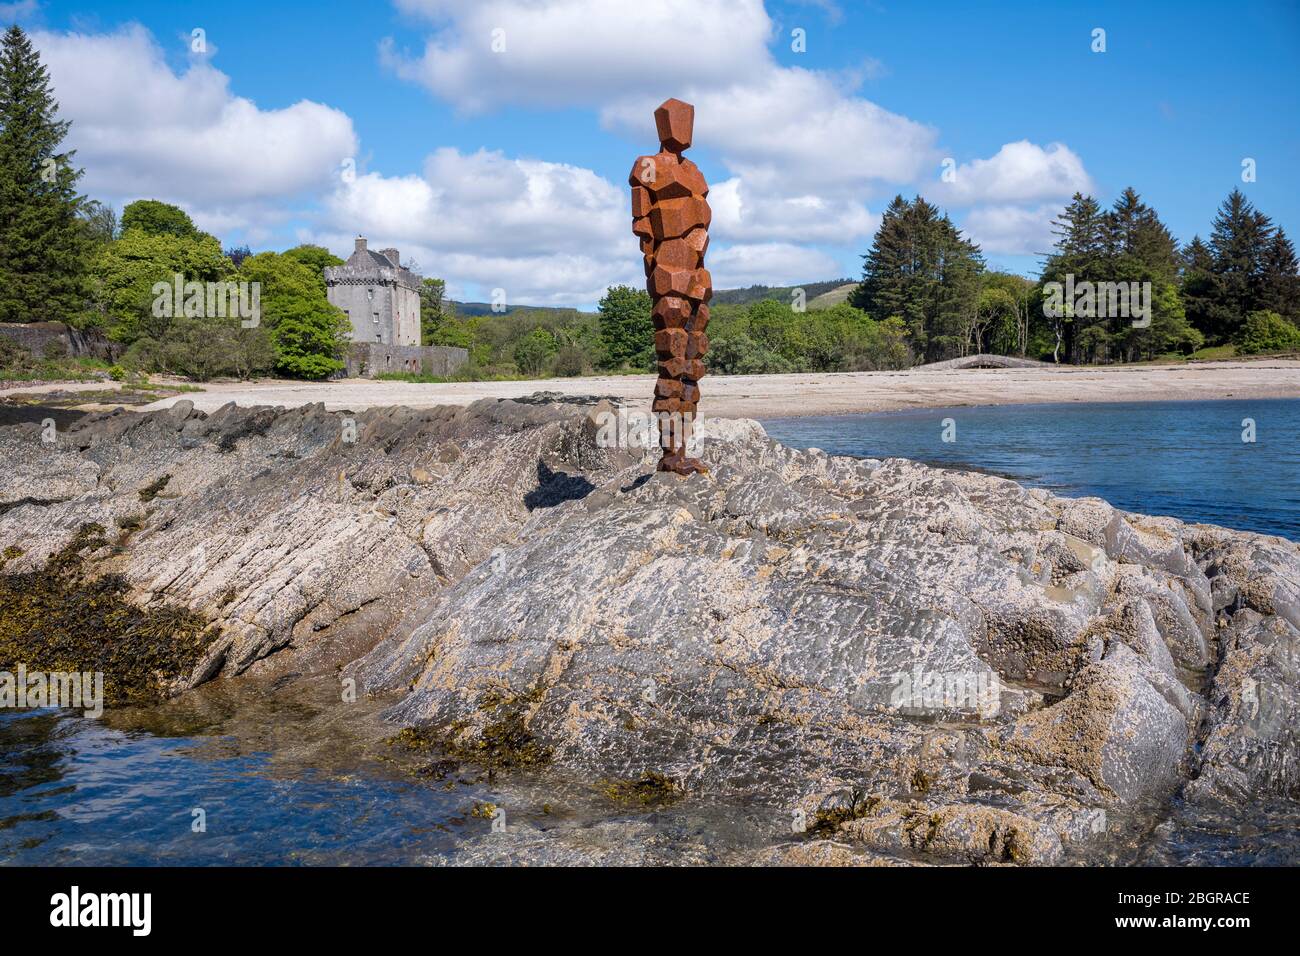 Antony Gormley sculpture GRIP of an abstract human form looking out over Saddell Bay, Kilbrannan Sound to Arran, Saddell Castle in background in Kinty Stock Photo